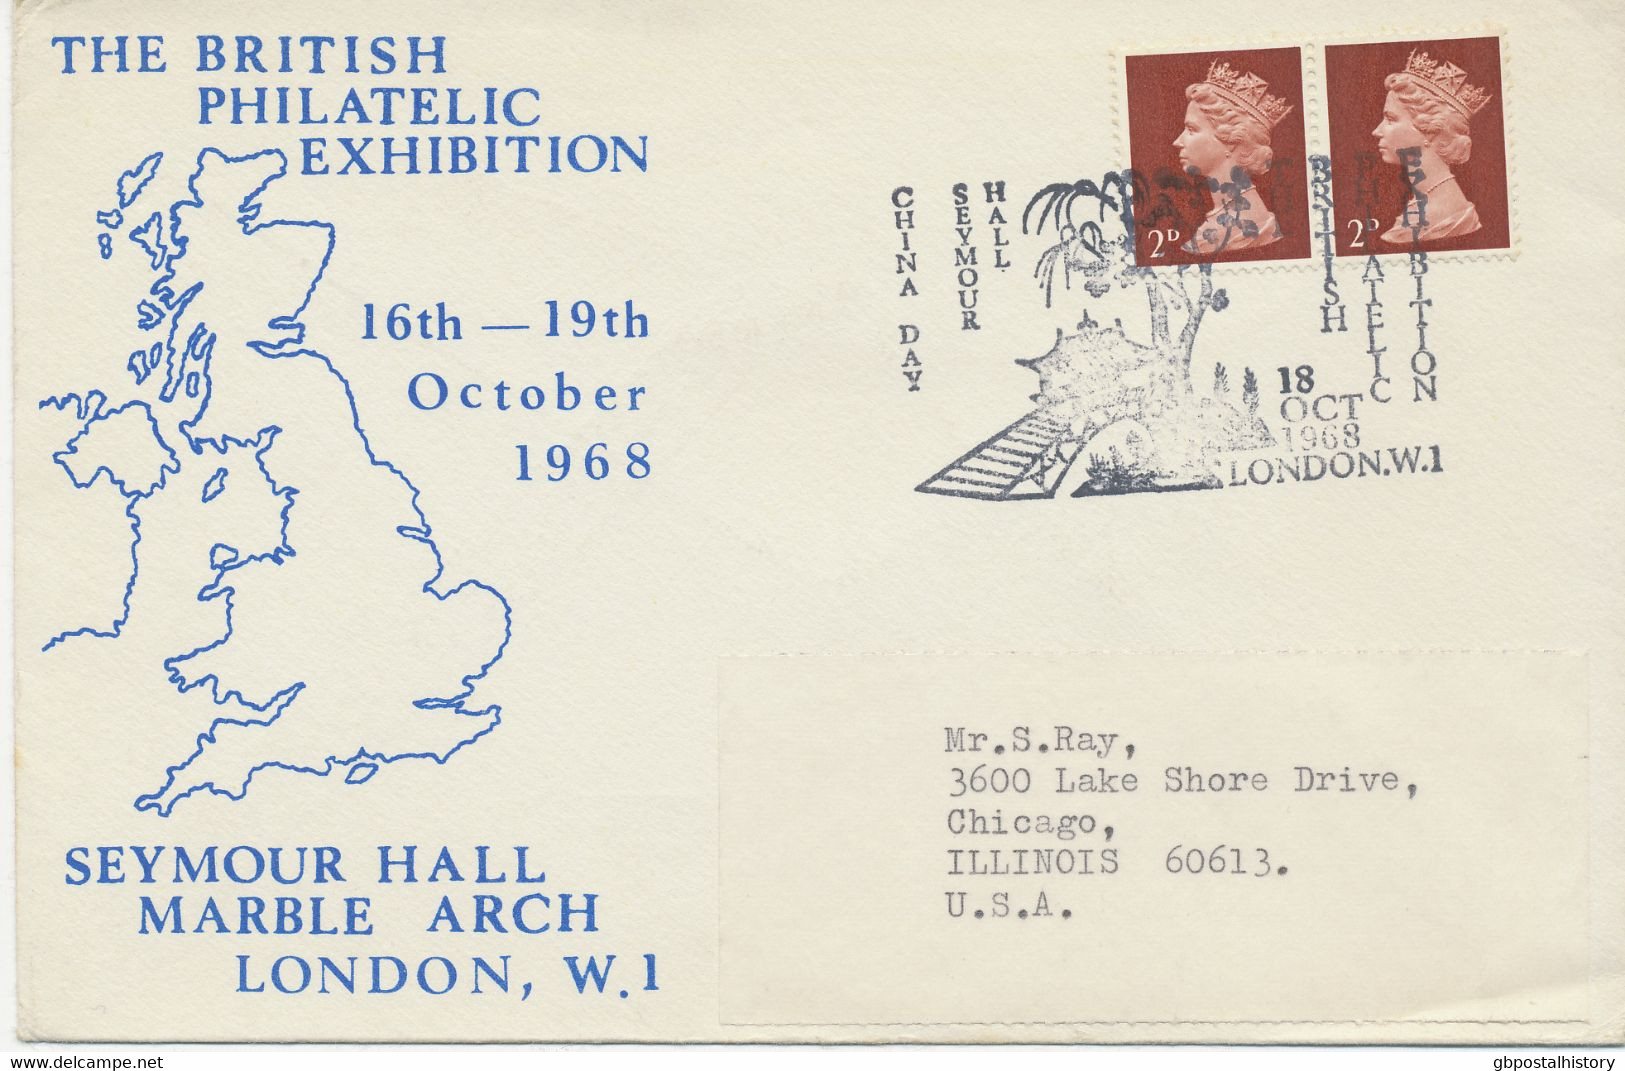 GB SPECIAL EVENT POSTMARKS PHILATELY 1968 The British Philatelic Exhibition Seymour Hall London W.I. - China Day To USA - Lettres & Documents